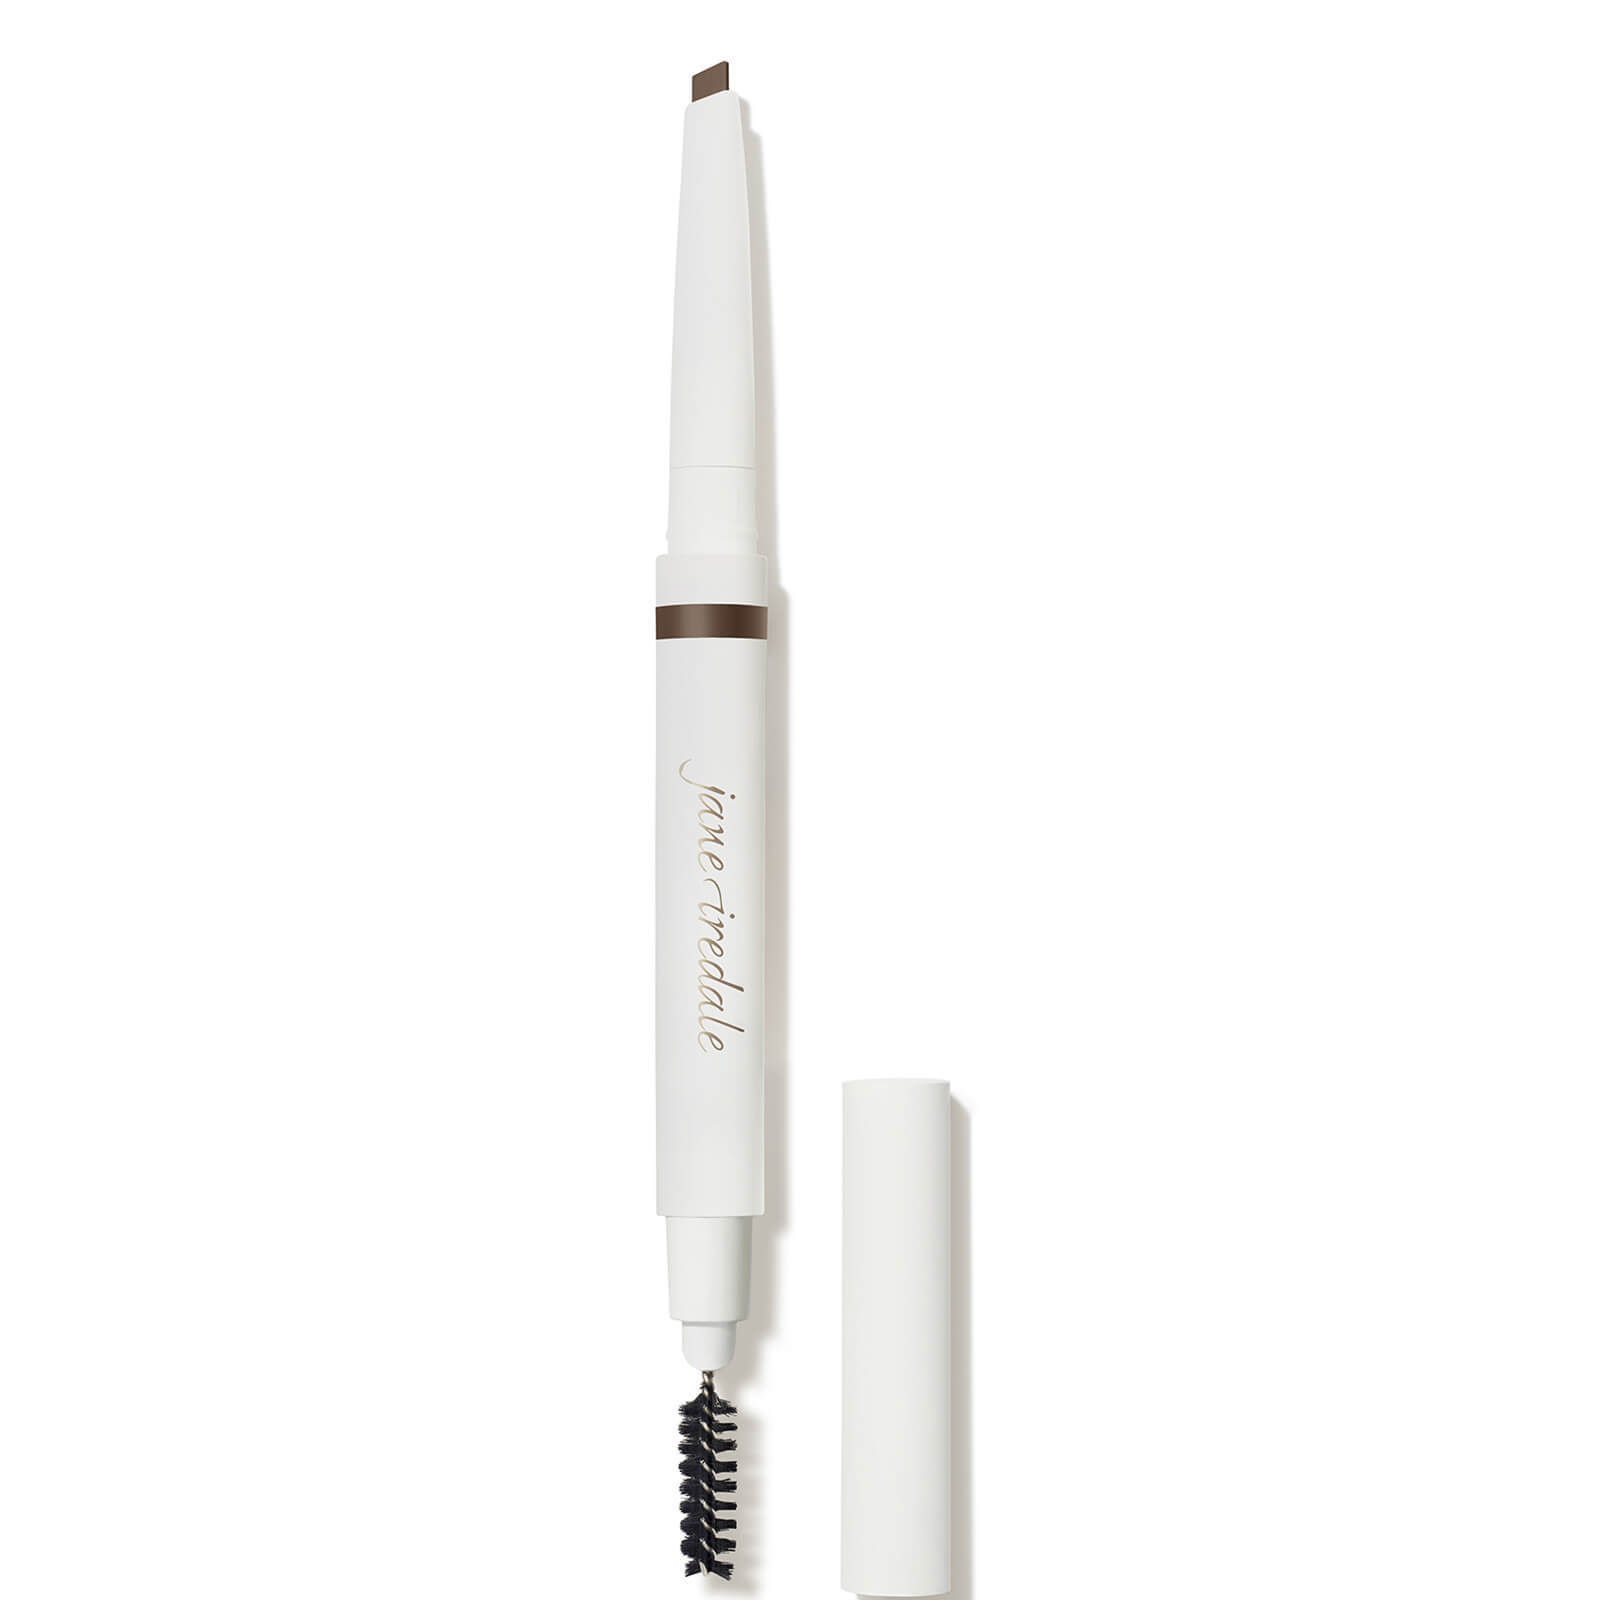 Jane Iredale Purebrow Shaping Pencil 0.23g (various Shades) In Medium Brown